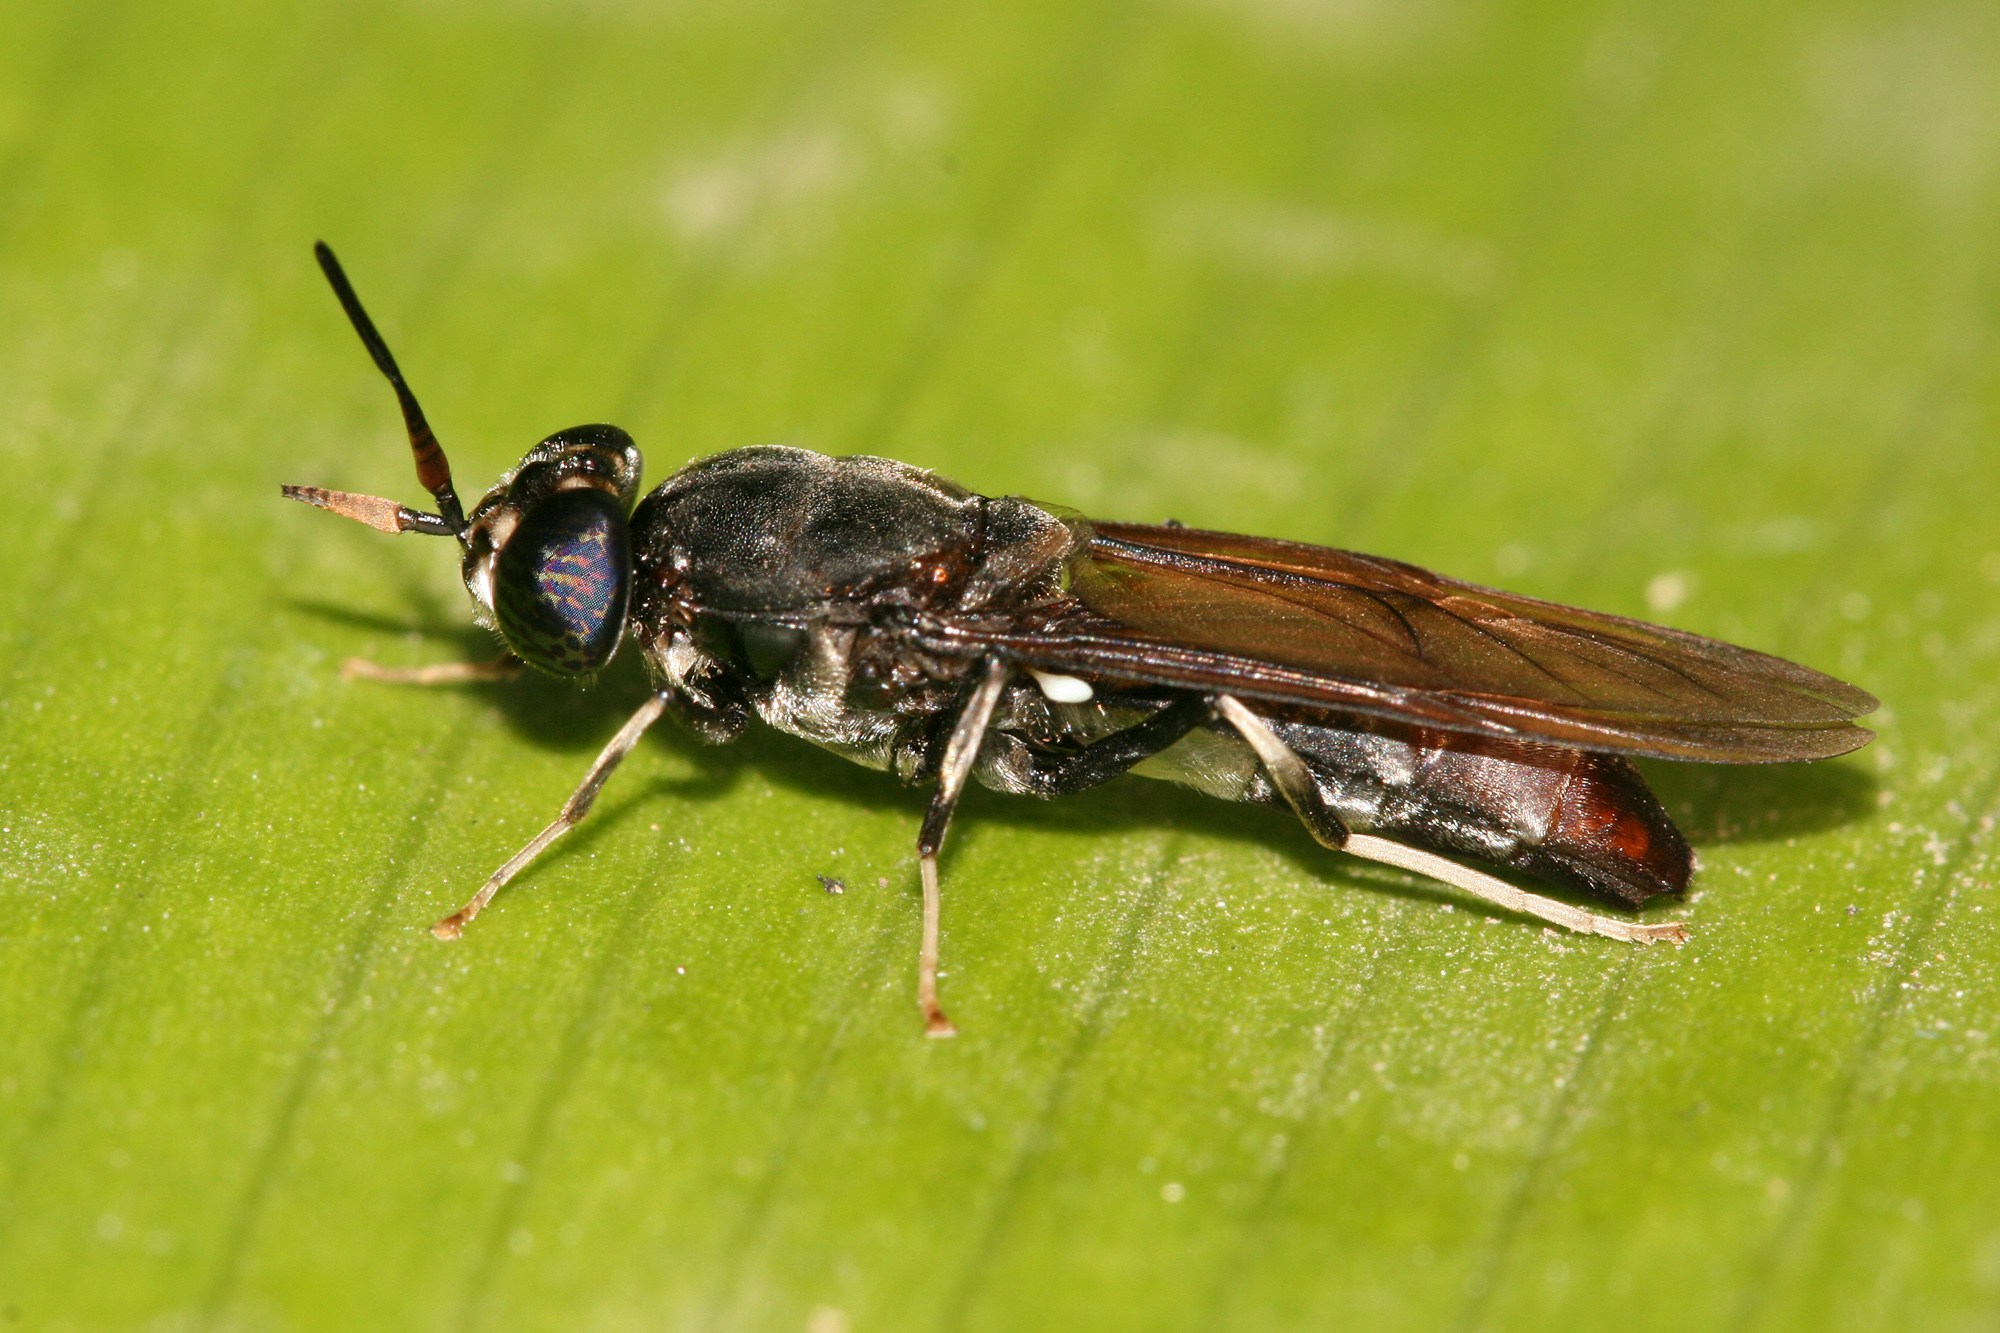 File:Black soldier fly.jpg - Wikimedia Commons